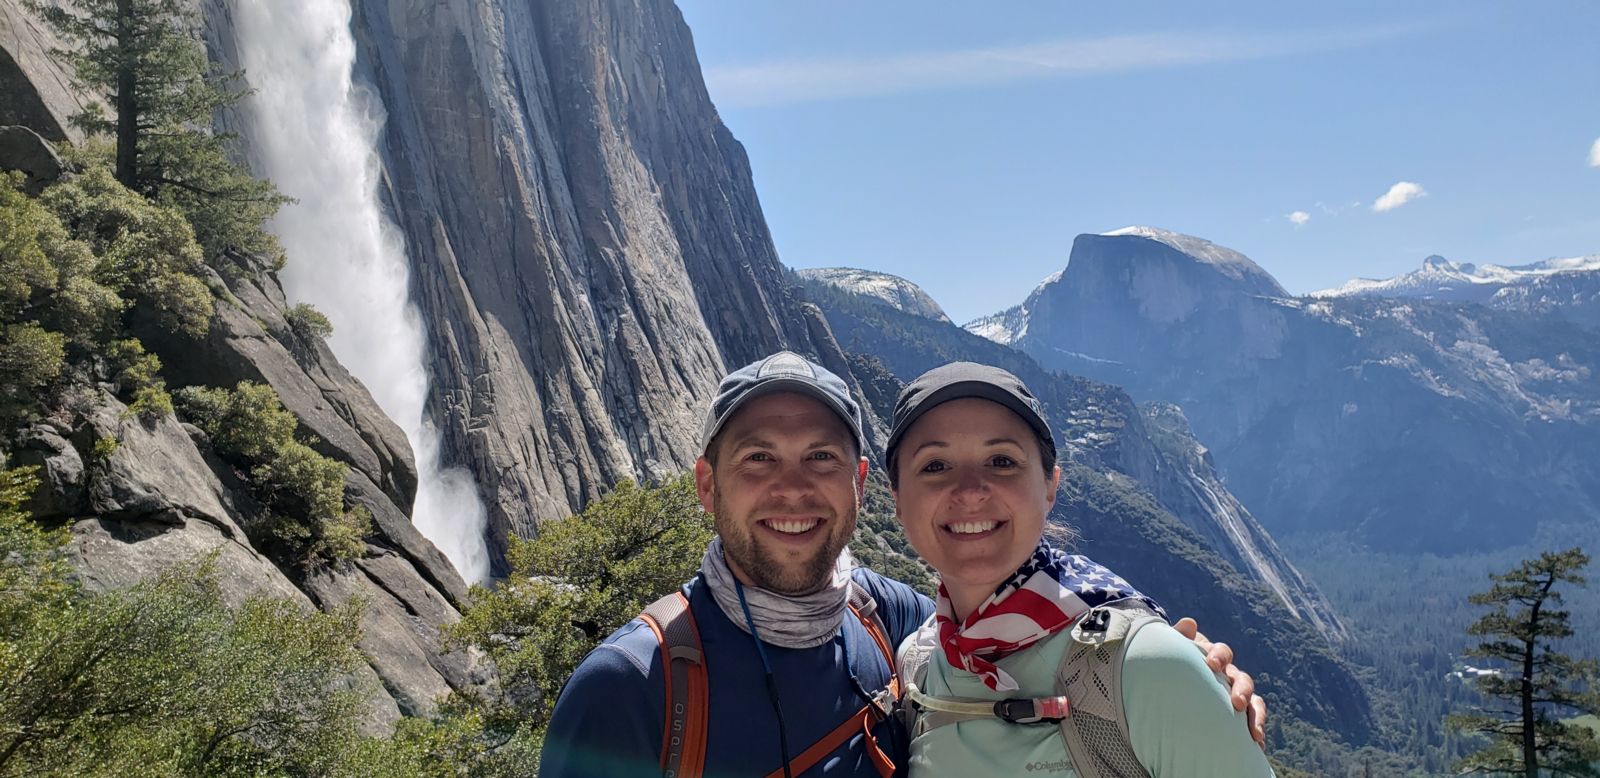 Nick Mock and his wife Kate on the Upper Yosemite Falls Trail